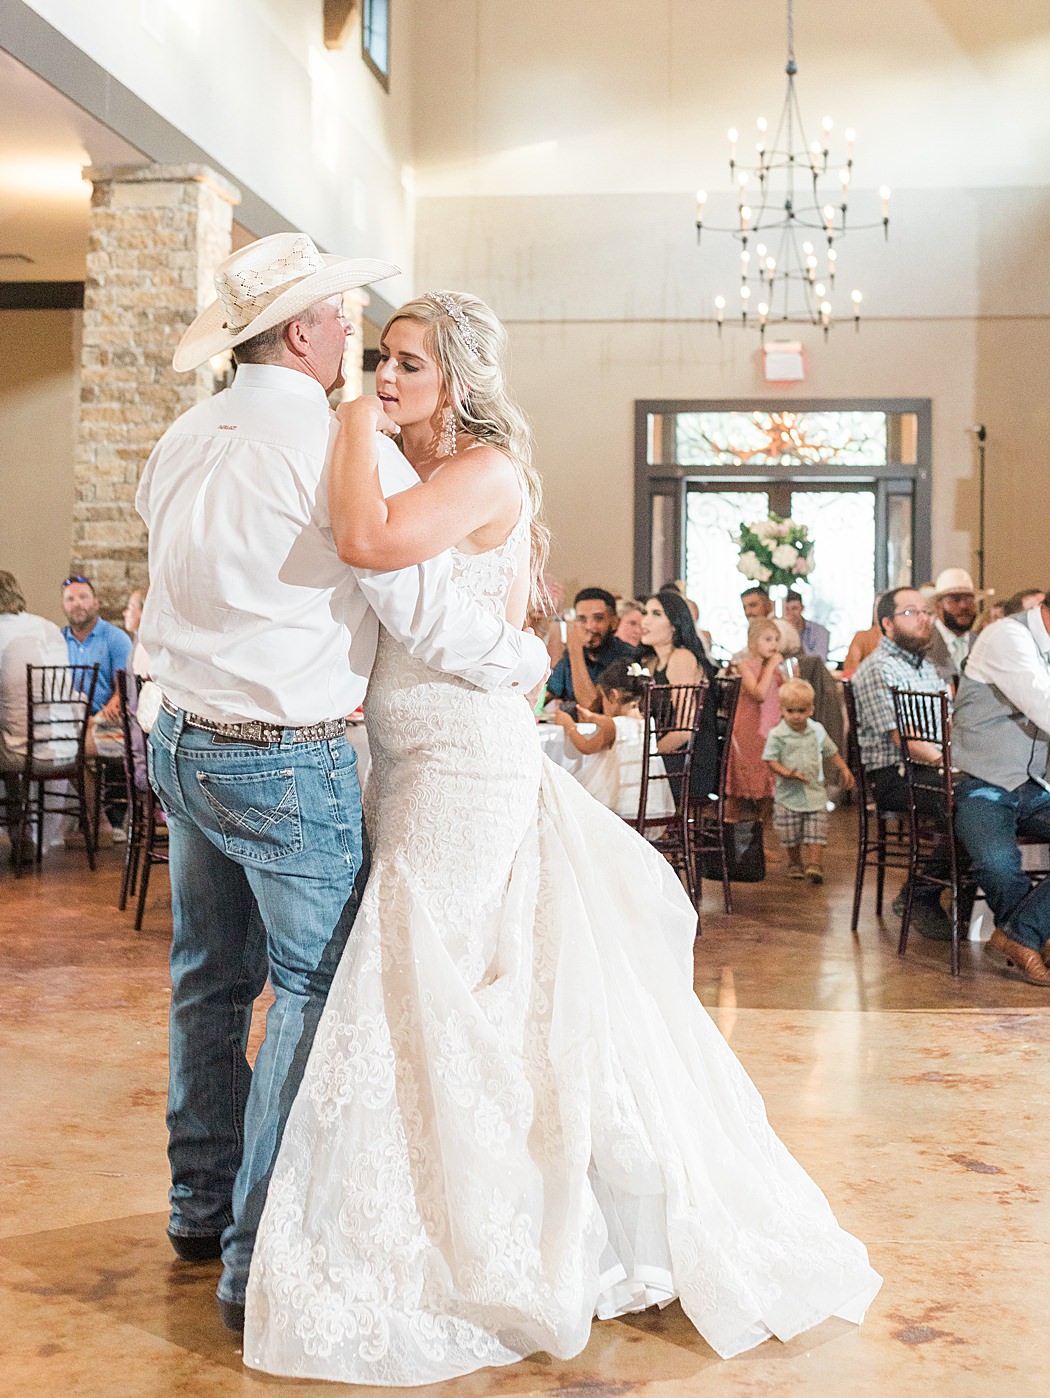 Summer Wedding at The Lodge at Country Inn Cottages in Fredericksburg Texas by Allison Jeffers Photography 0120